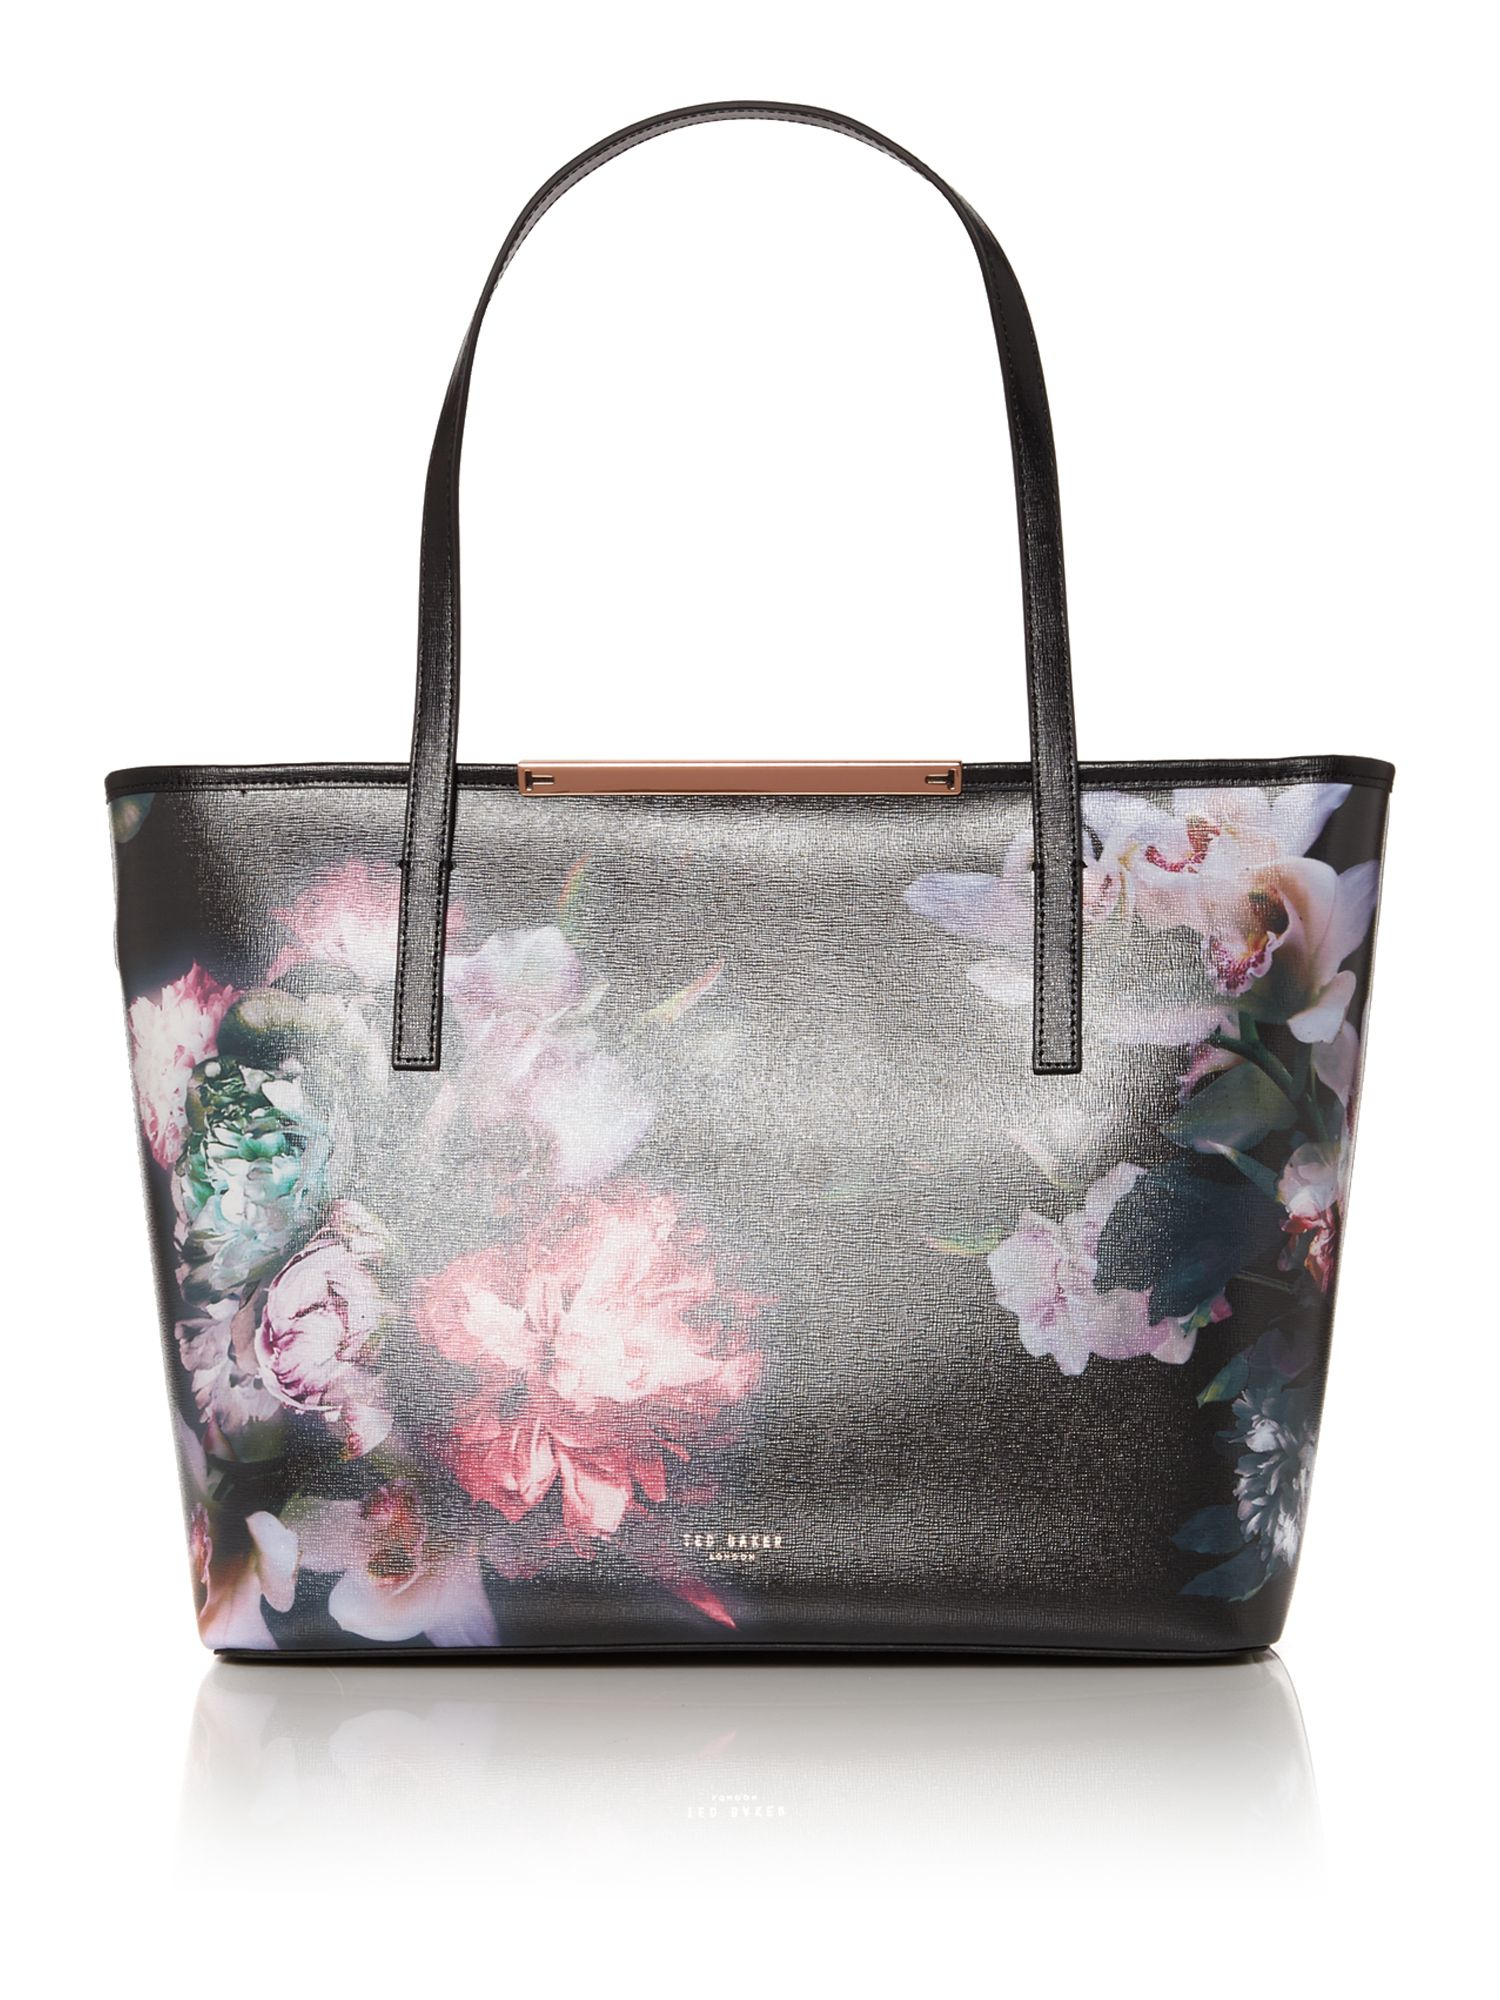 Ted Baker Lietta Black Floral Large Tote Bag in Pink - Lyst